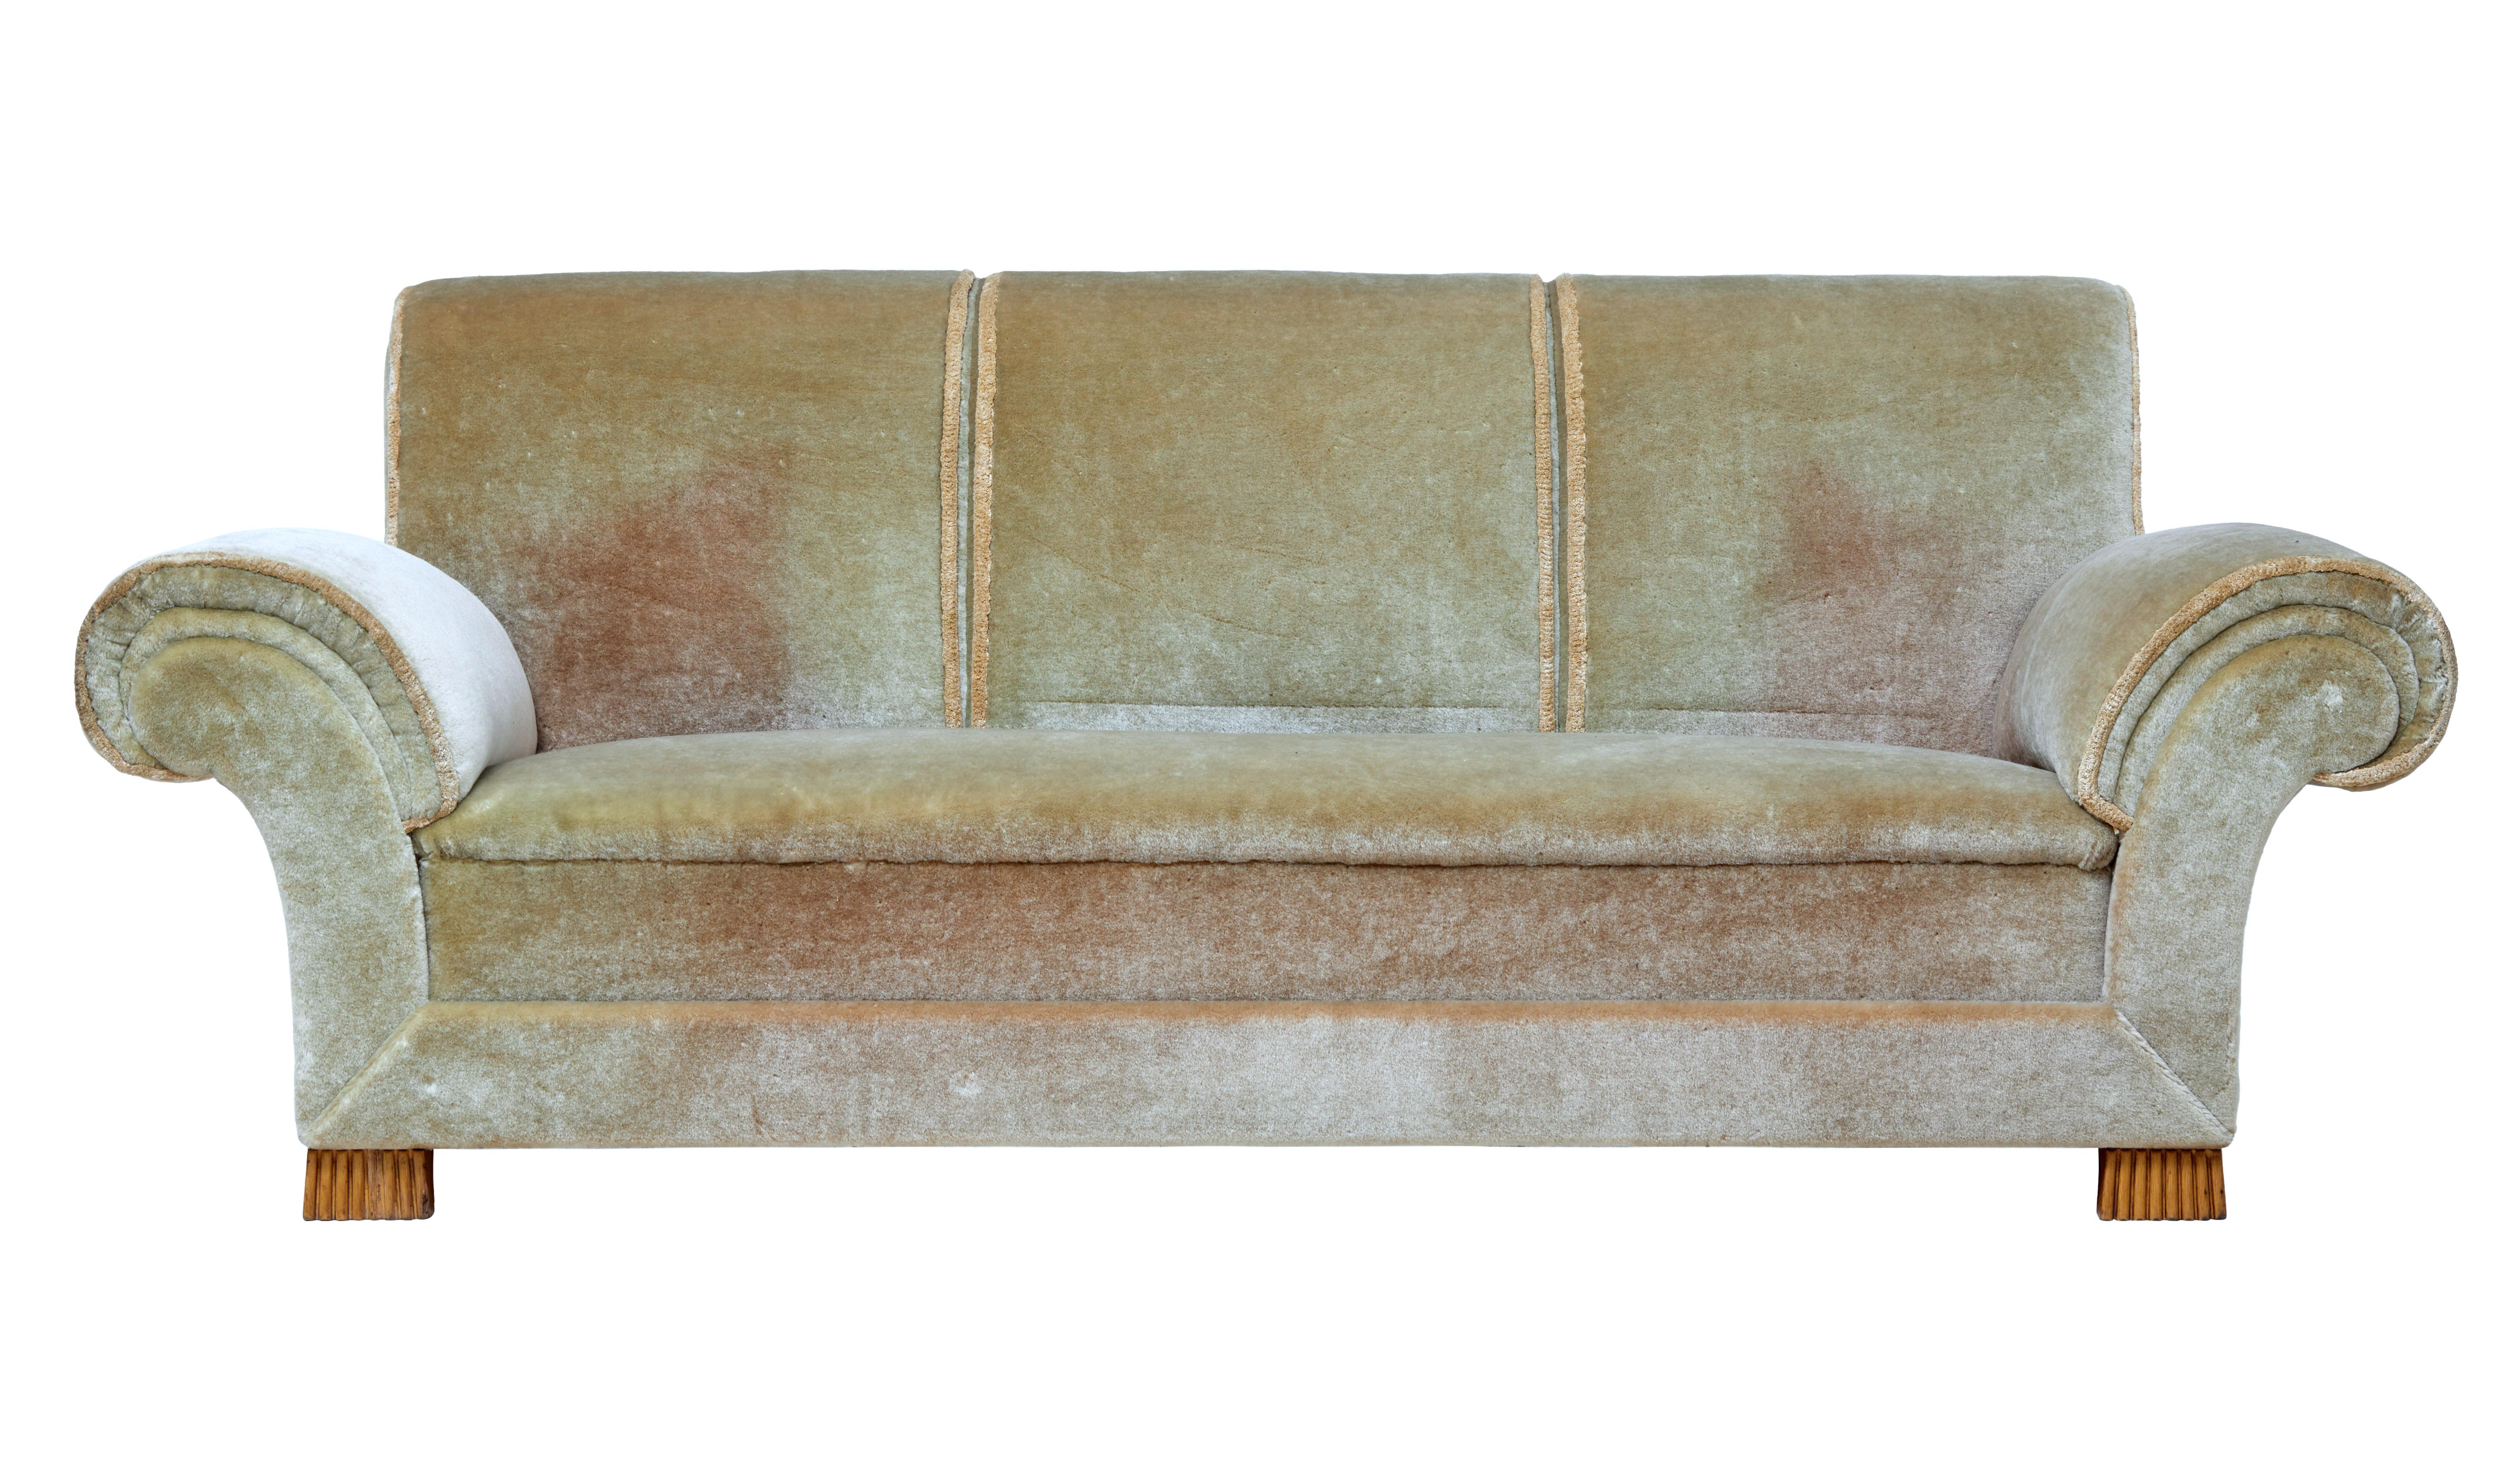 Here we have a living room suite comprising of a sofa and armchair, circa 1930.

Of grand proportions, with typical Art Deco flowing arms and scrolling back rest.

Upholstered in a thick green fabric which has become faded over the years, but